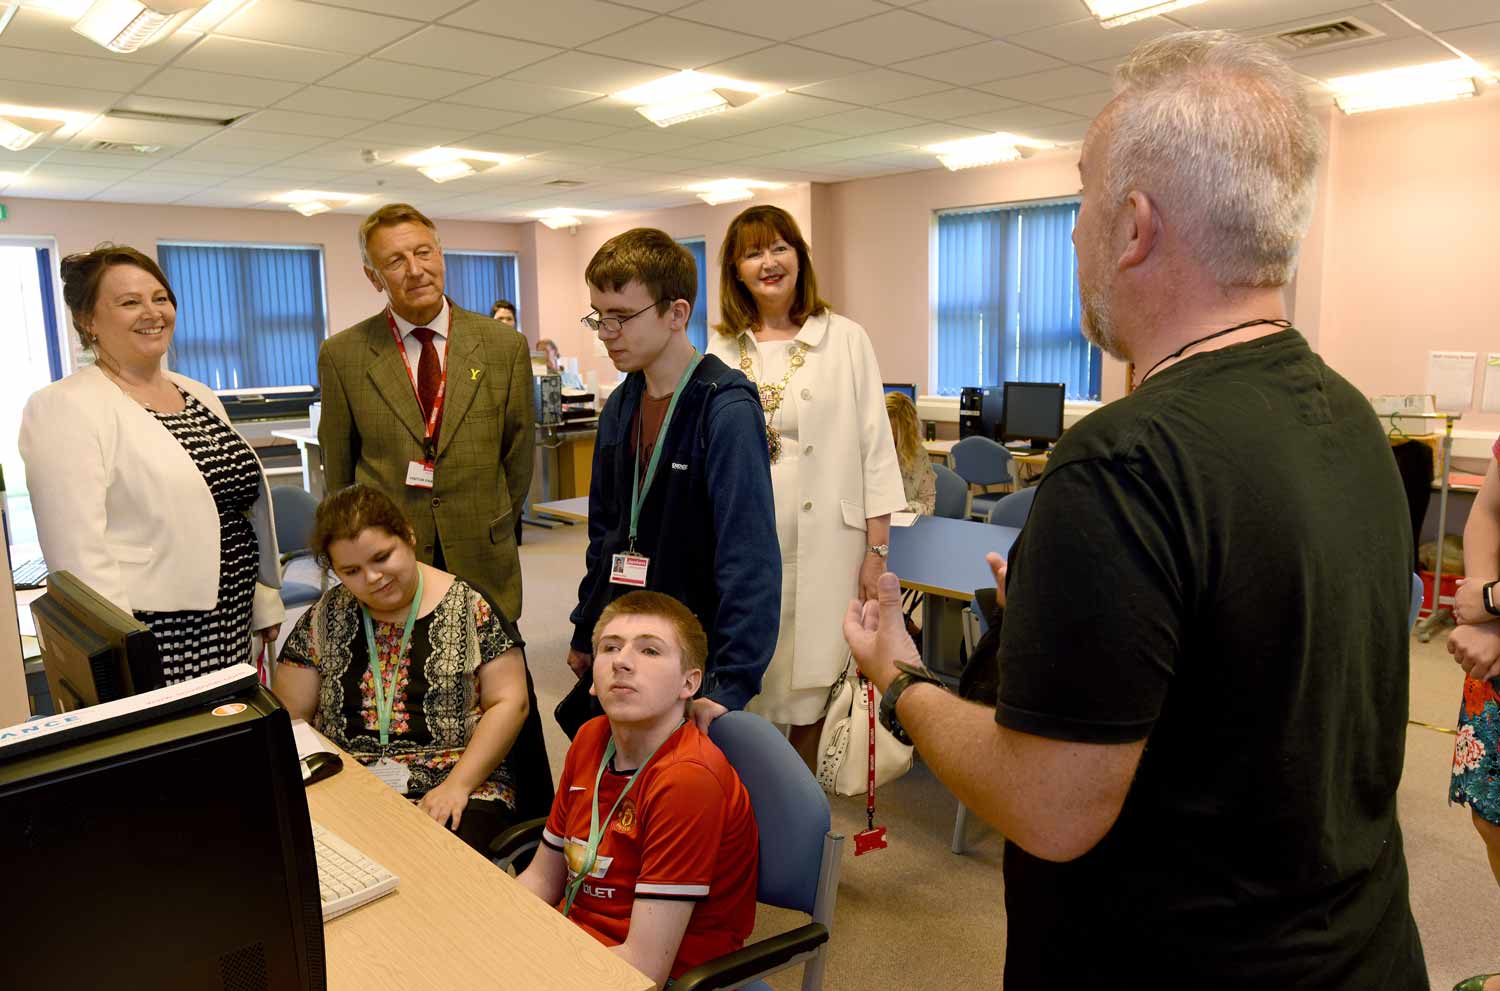 Watching a lesson with Work Experience Co-ordinator Lee Gray, right, are Principal Angela North, the Lord Lieutenant Barry Dodd and the Mayor of the Borough of Harrogate, Coun Anne Jones with students Marnie Lane, Matthew Glass and Thomas Arrol